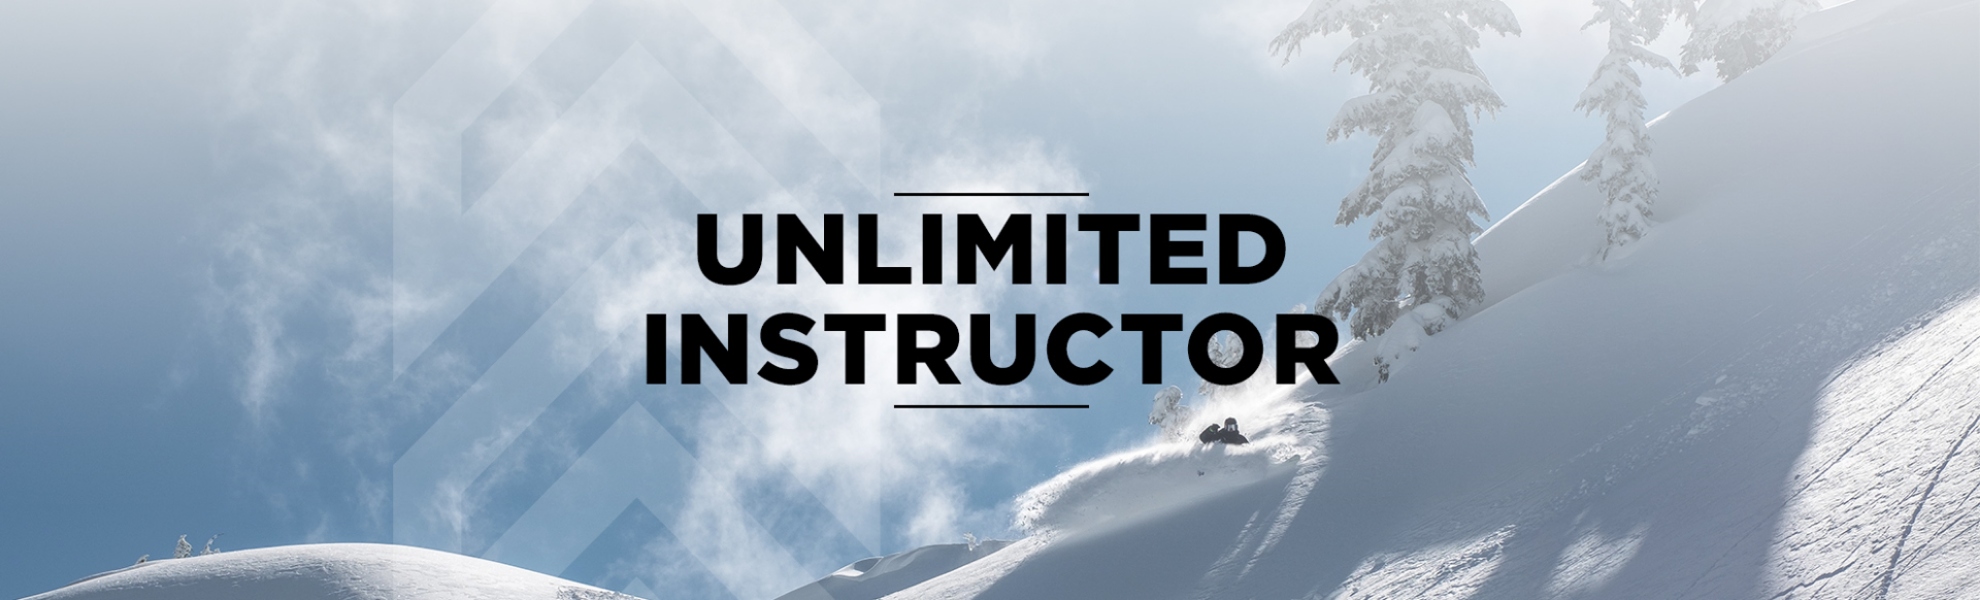 Picture of 23/24 Unlimited Instructor Pass - Invoice